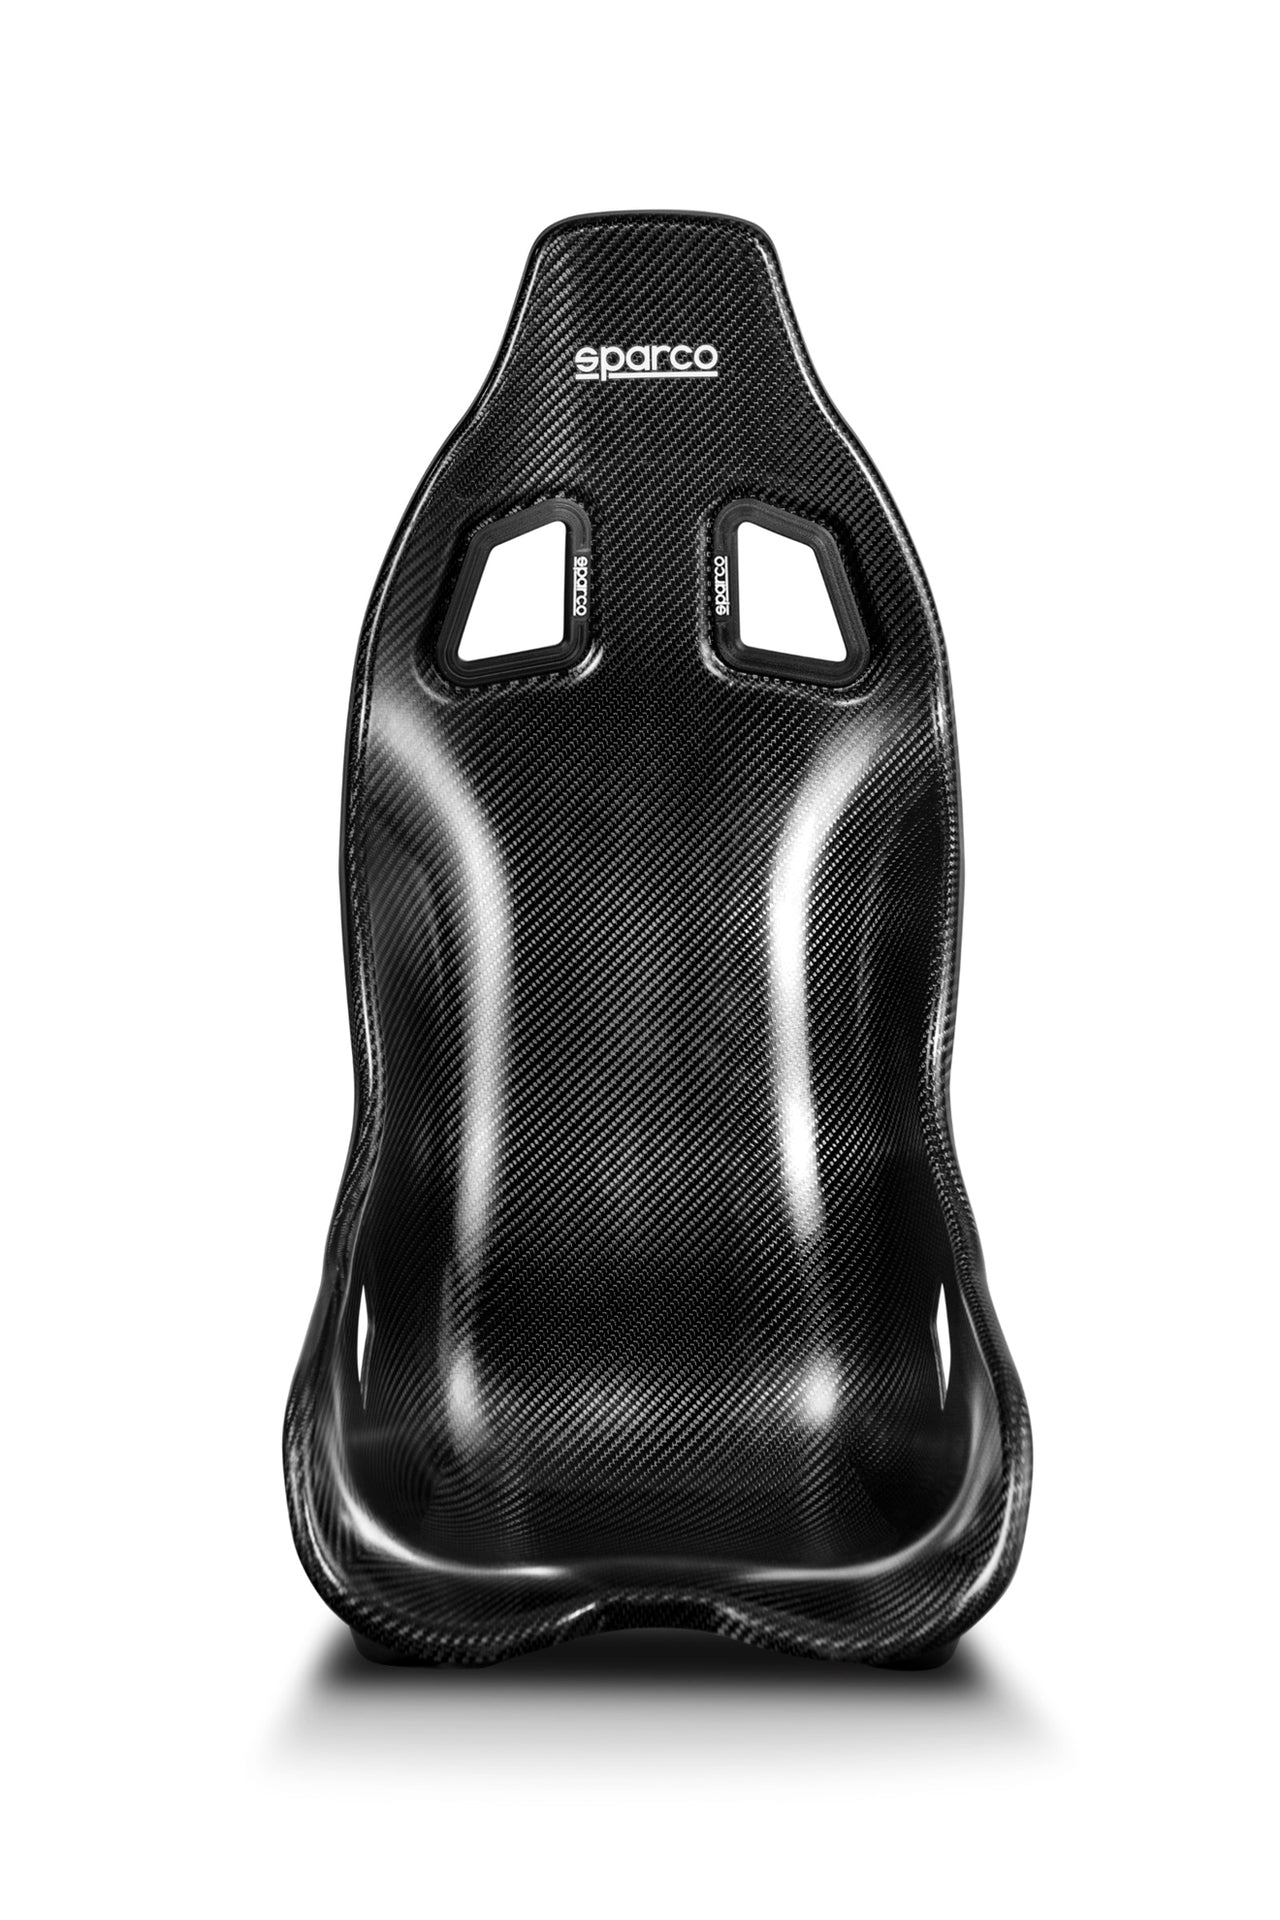 Sparco Ultra Carbon Fiber Racing Seat 008037ZNR The Lowest Price at the Best Deal wih a Discount when on Sale Front